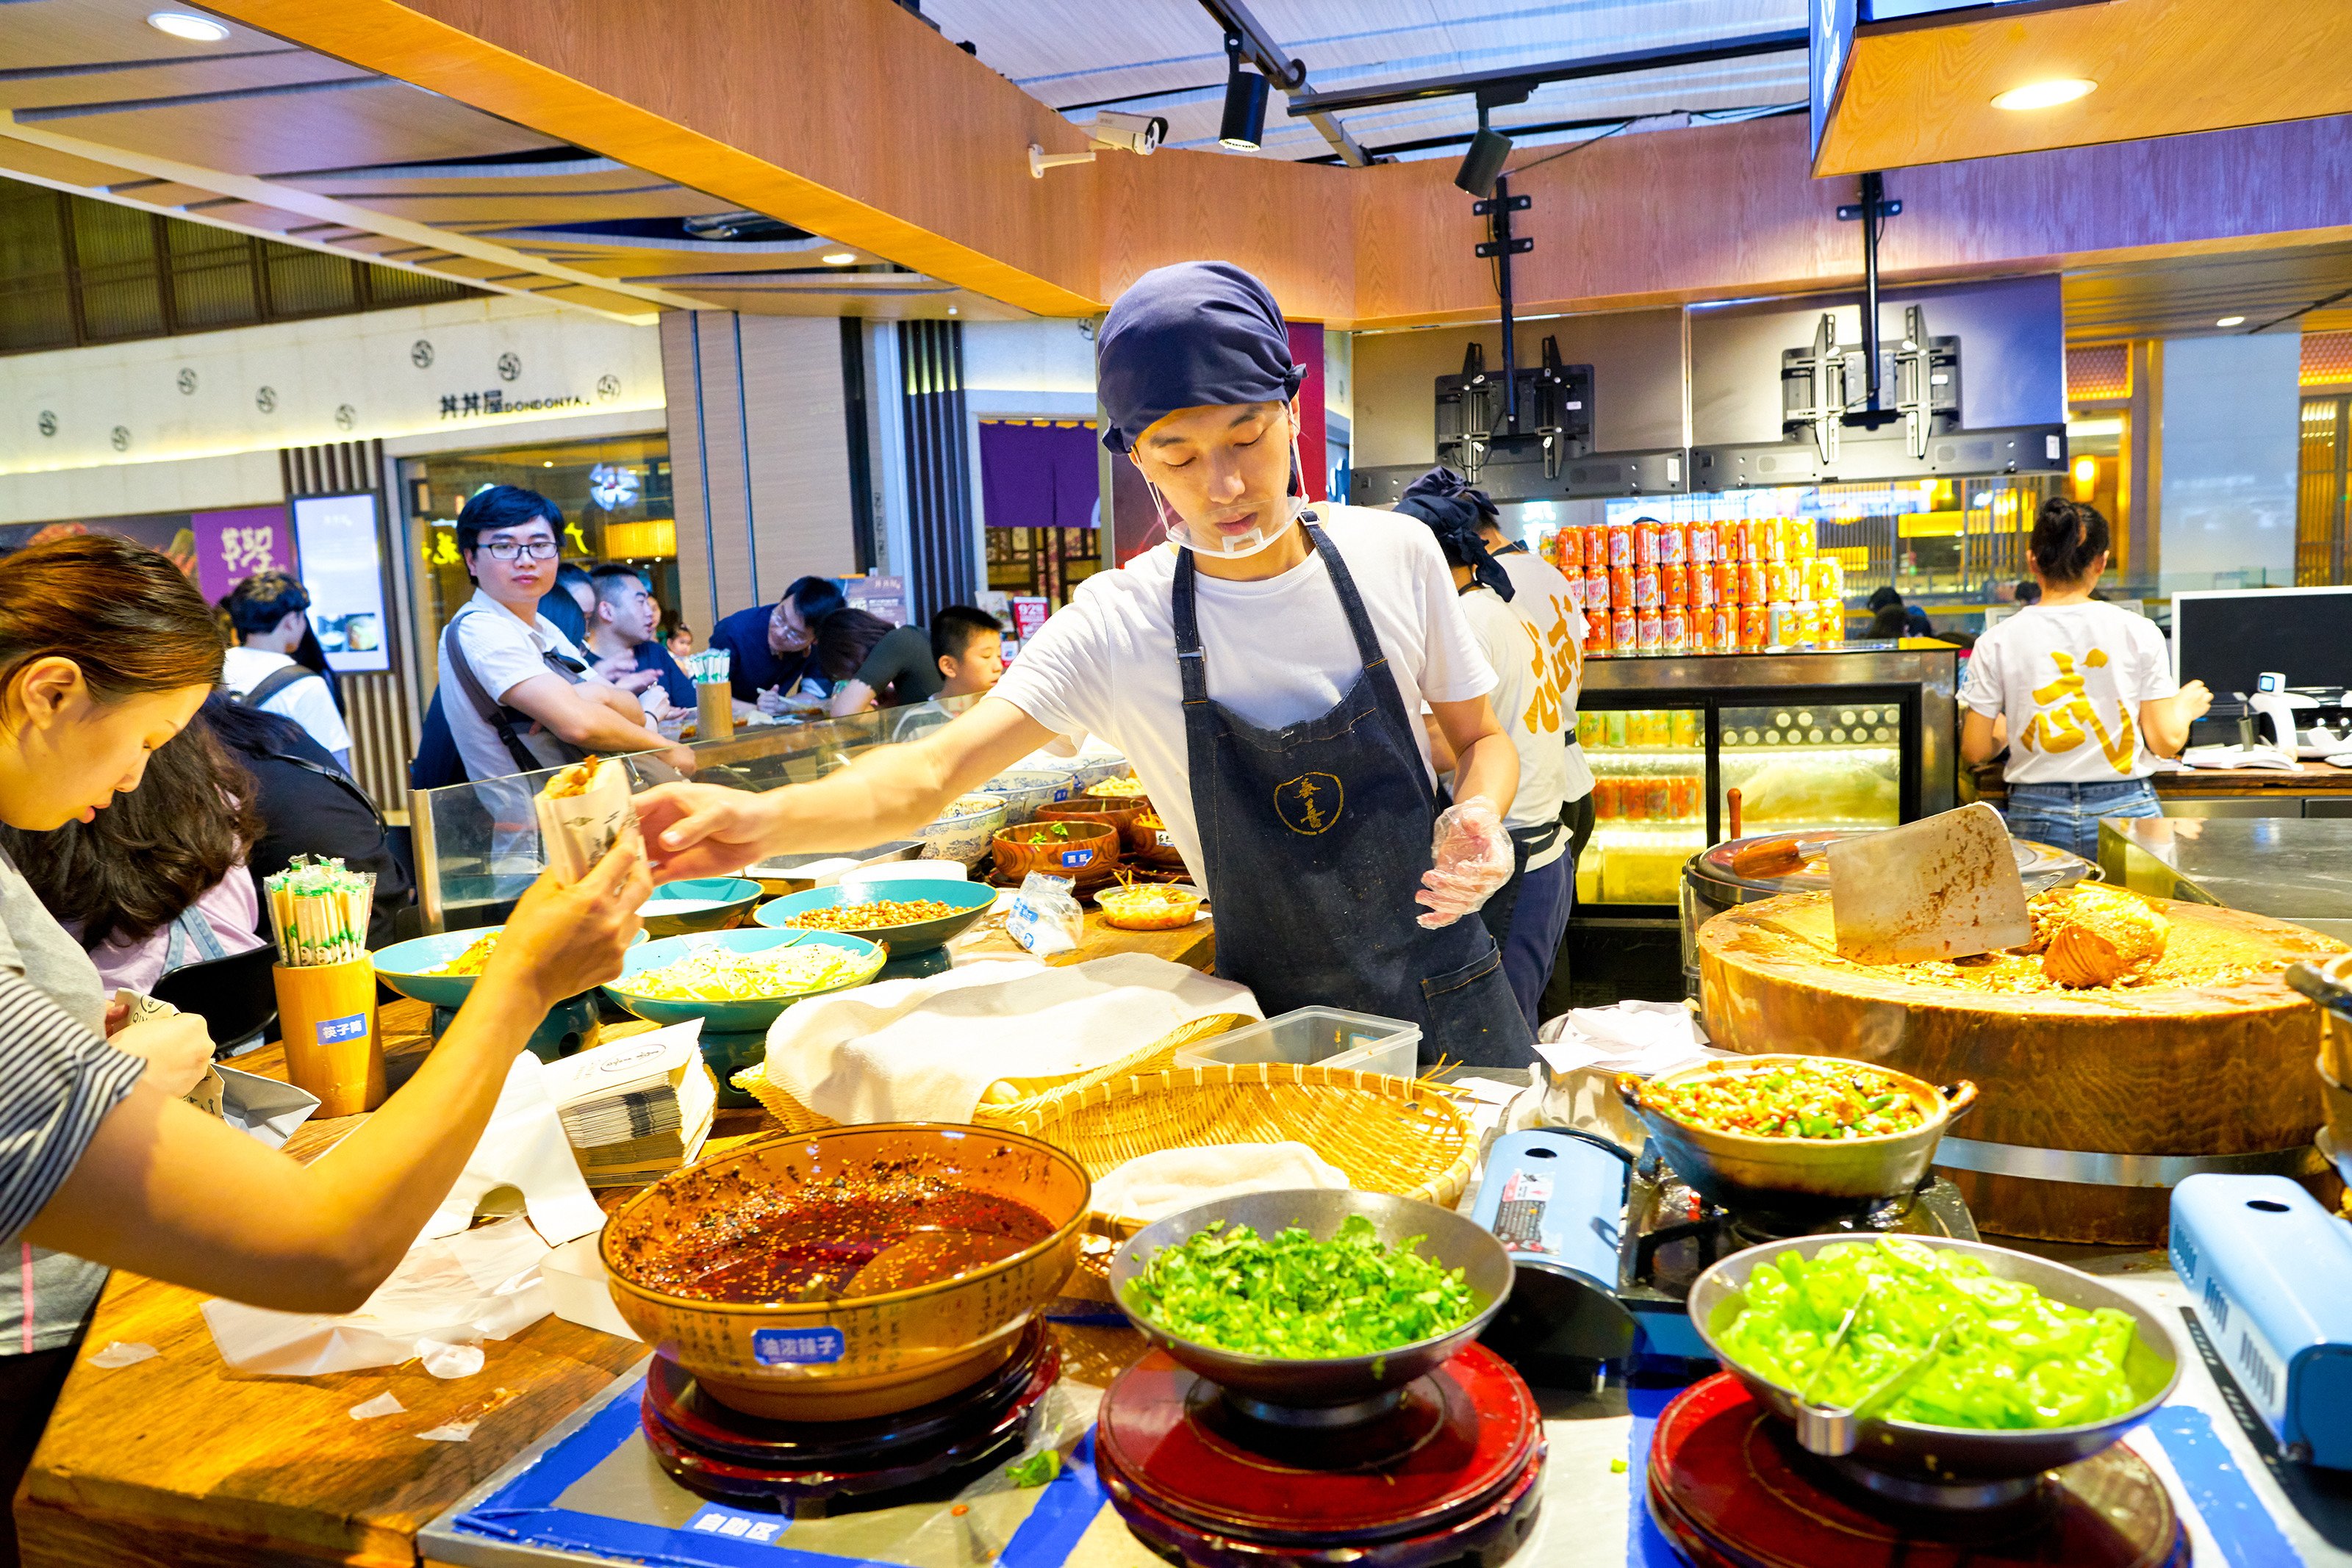 A food vendor in a Shenzhen shopping mall. Hong Kong bars and restaurants are suffering as large numbers of Hong Kong people head to the southern Chinese city to enjoy food that costs much less than at home. Photo: Shutterstock